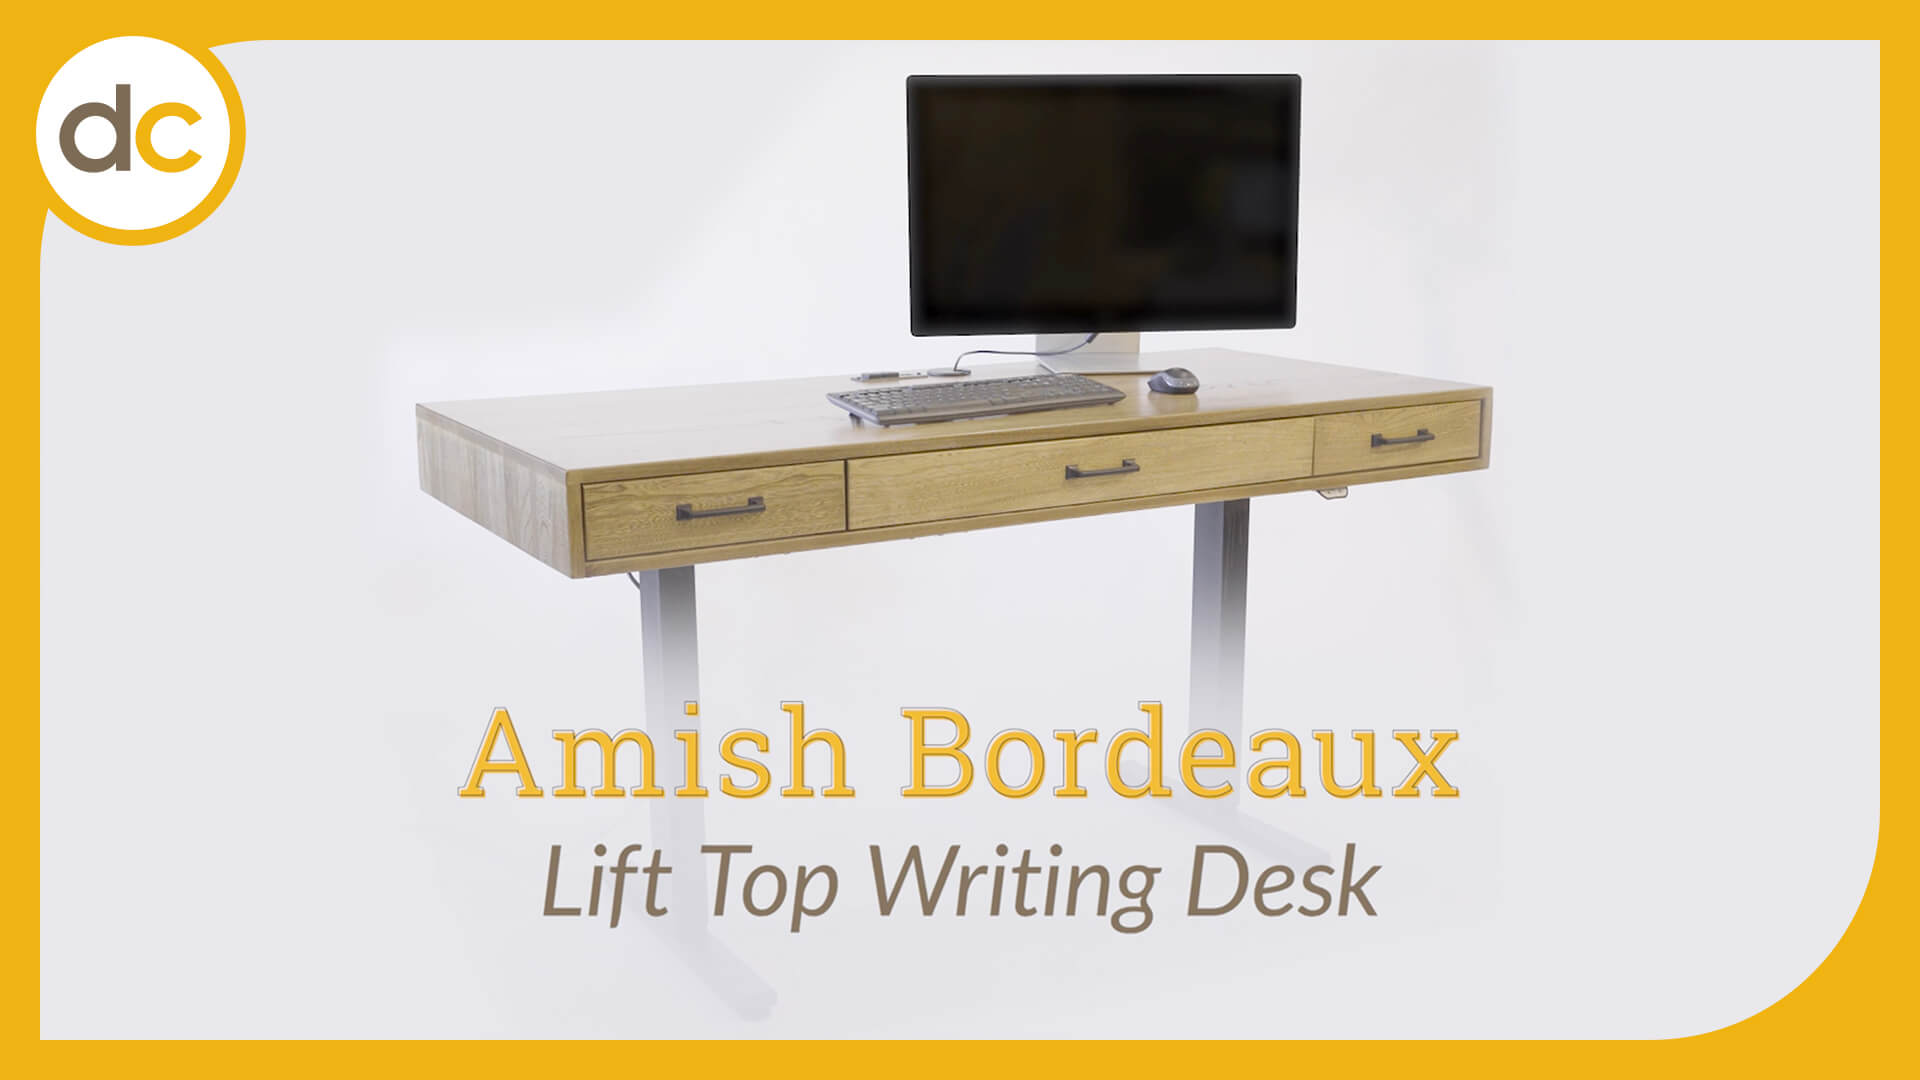 Video title saying Amish Bordeaux Lift Top Writing Desk over a photo of a desk on a white background and yellow border